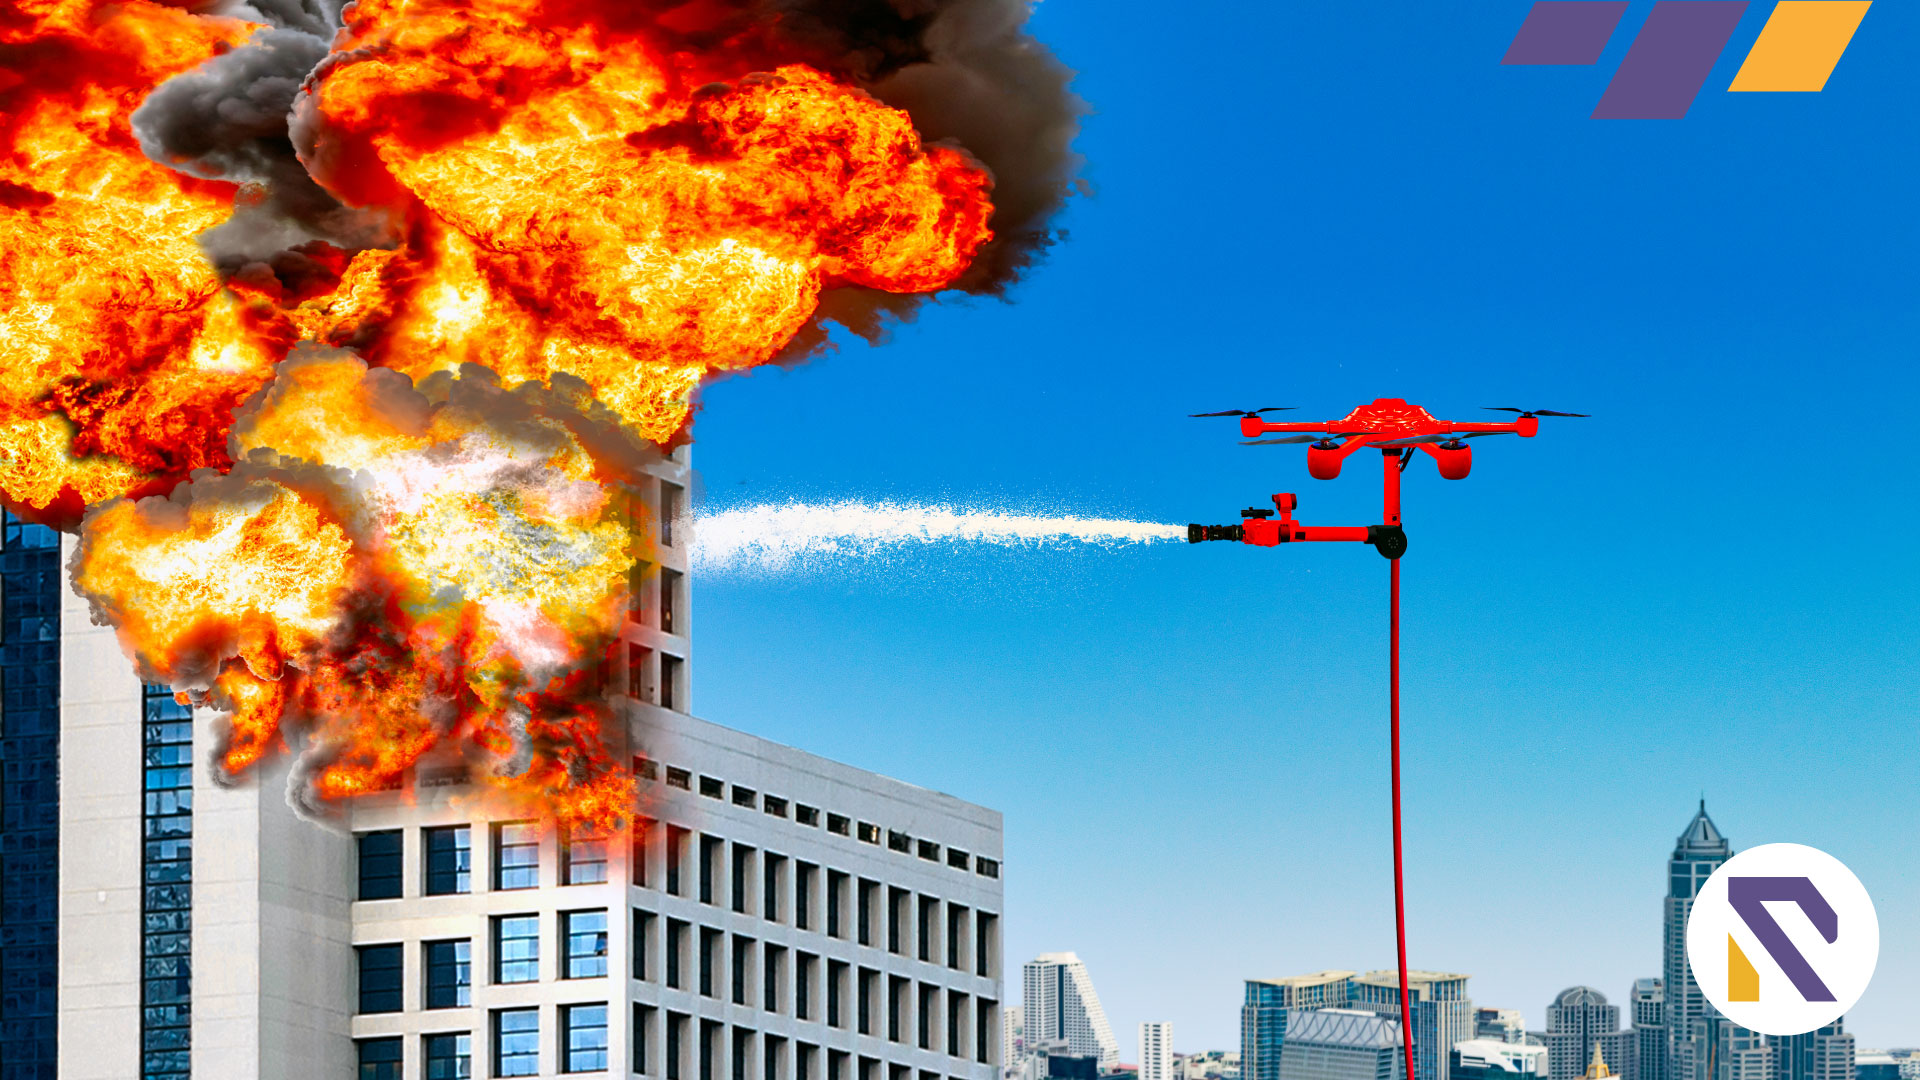 Drones in firefighting system